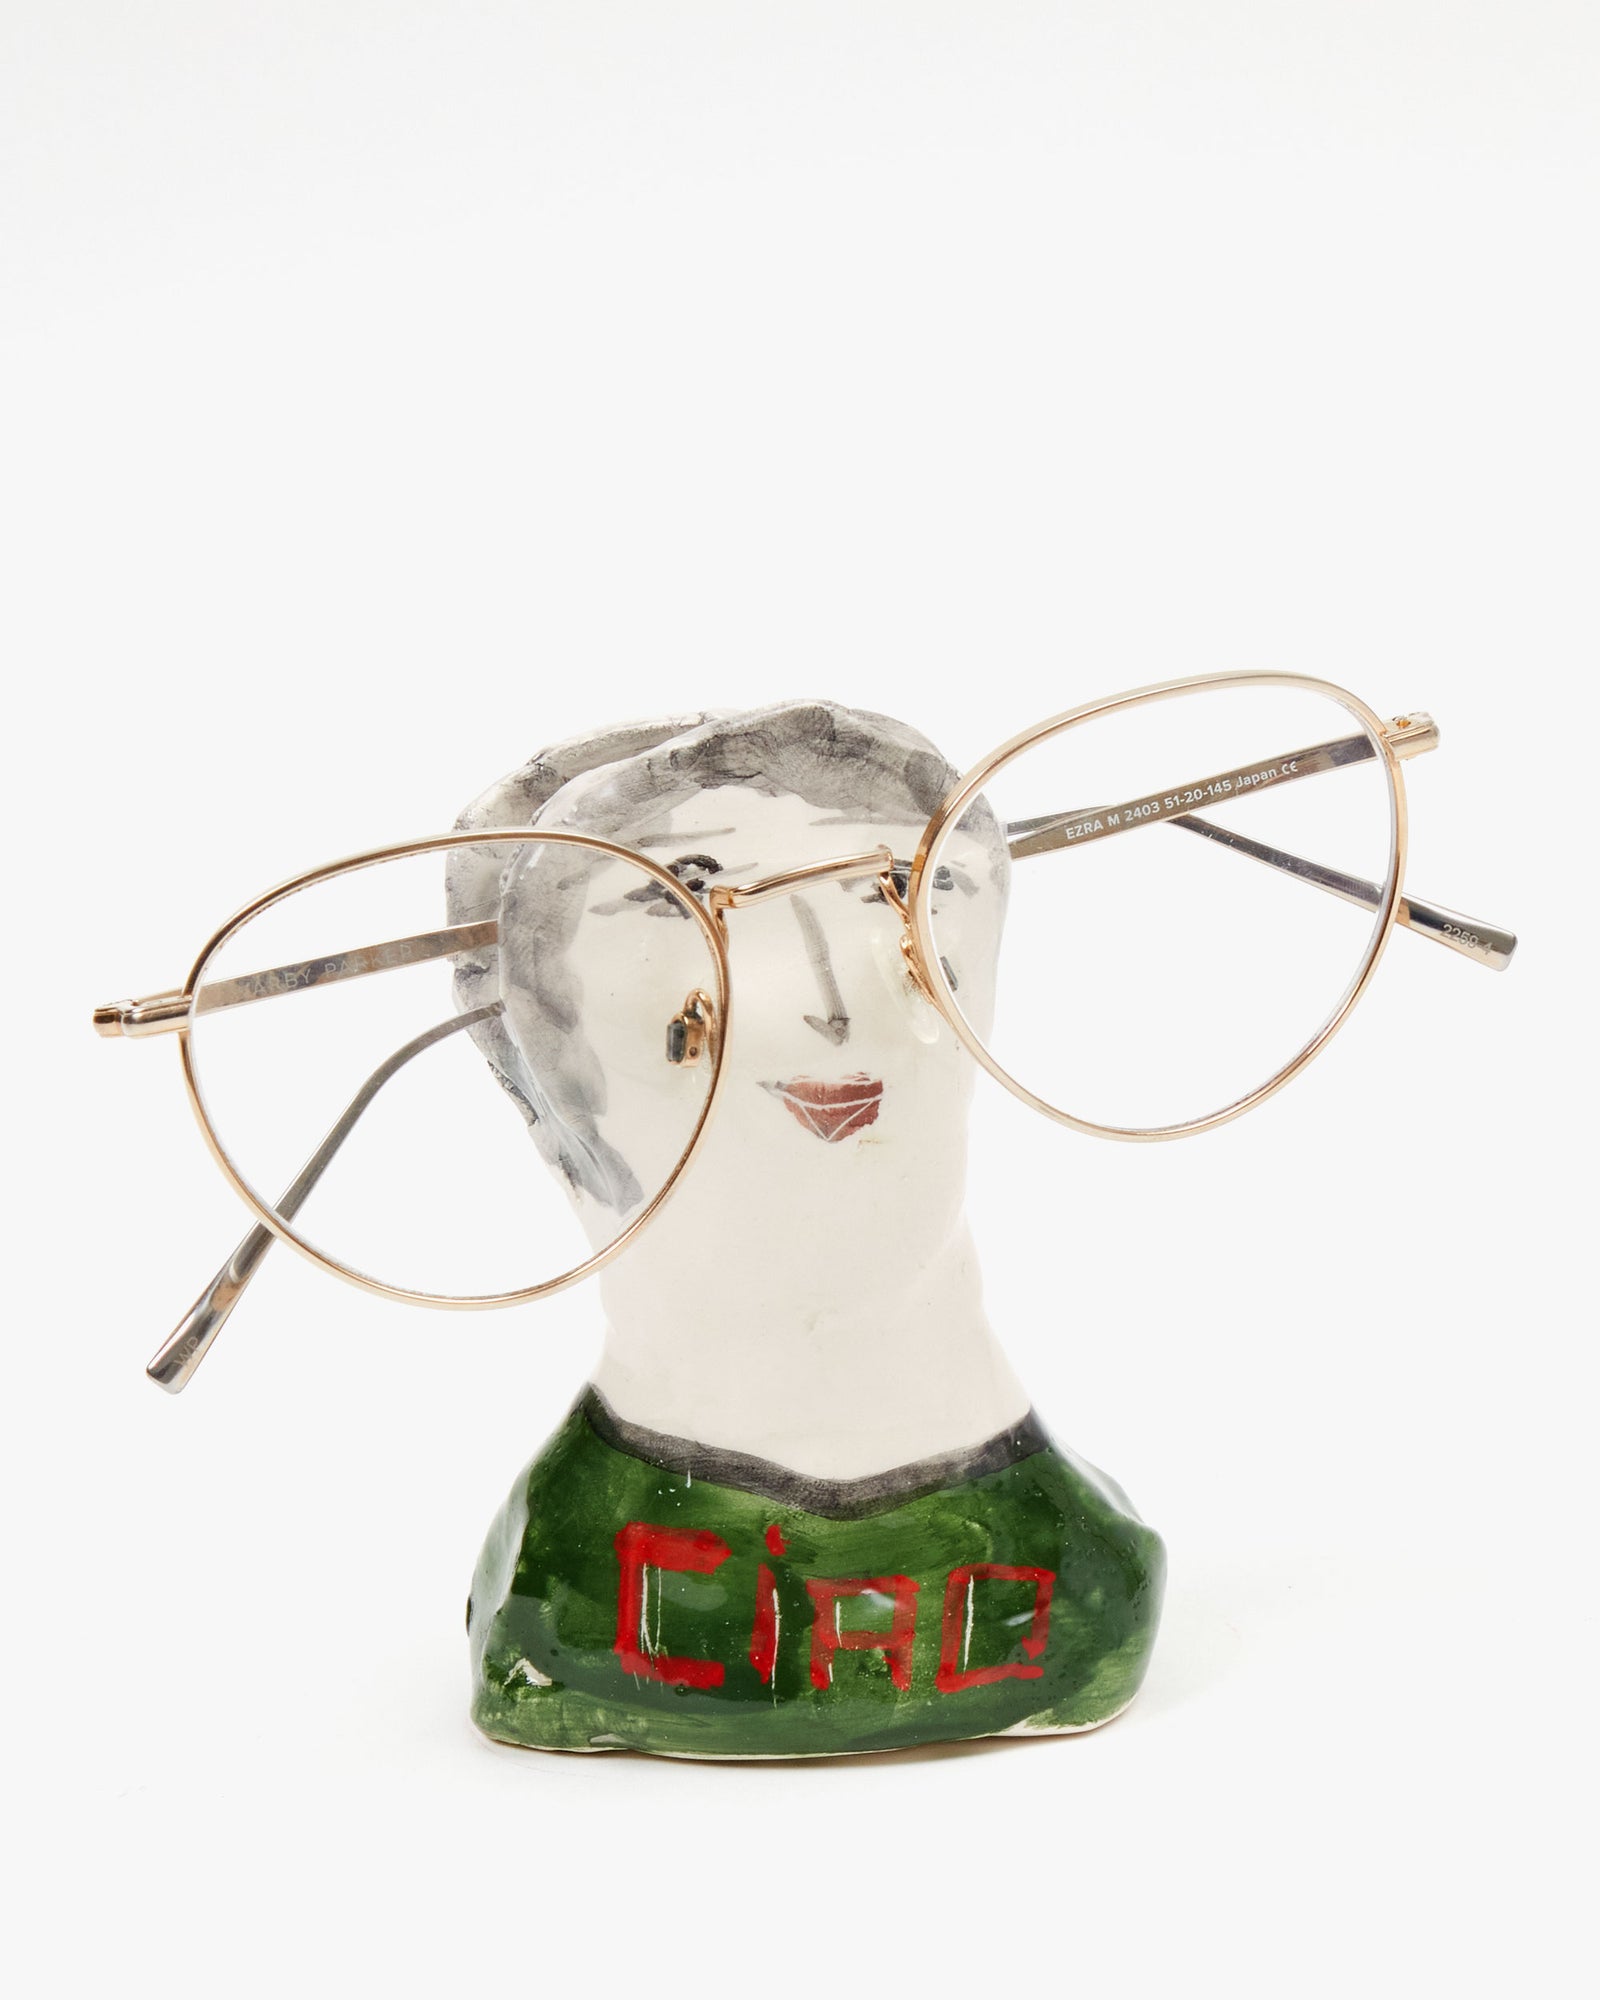 Marco Ferrini Ciao Male Spectacles Holder with a pair of wire frame glasses on them 